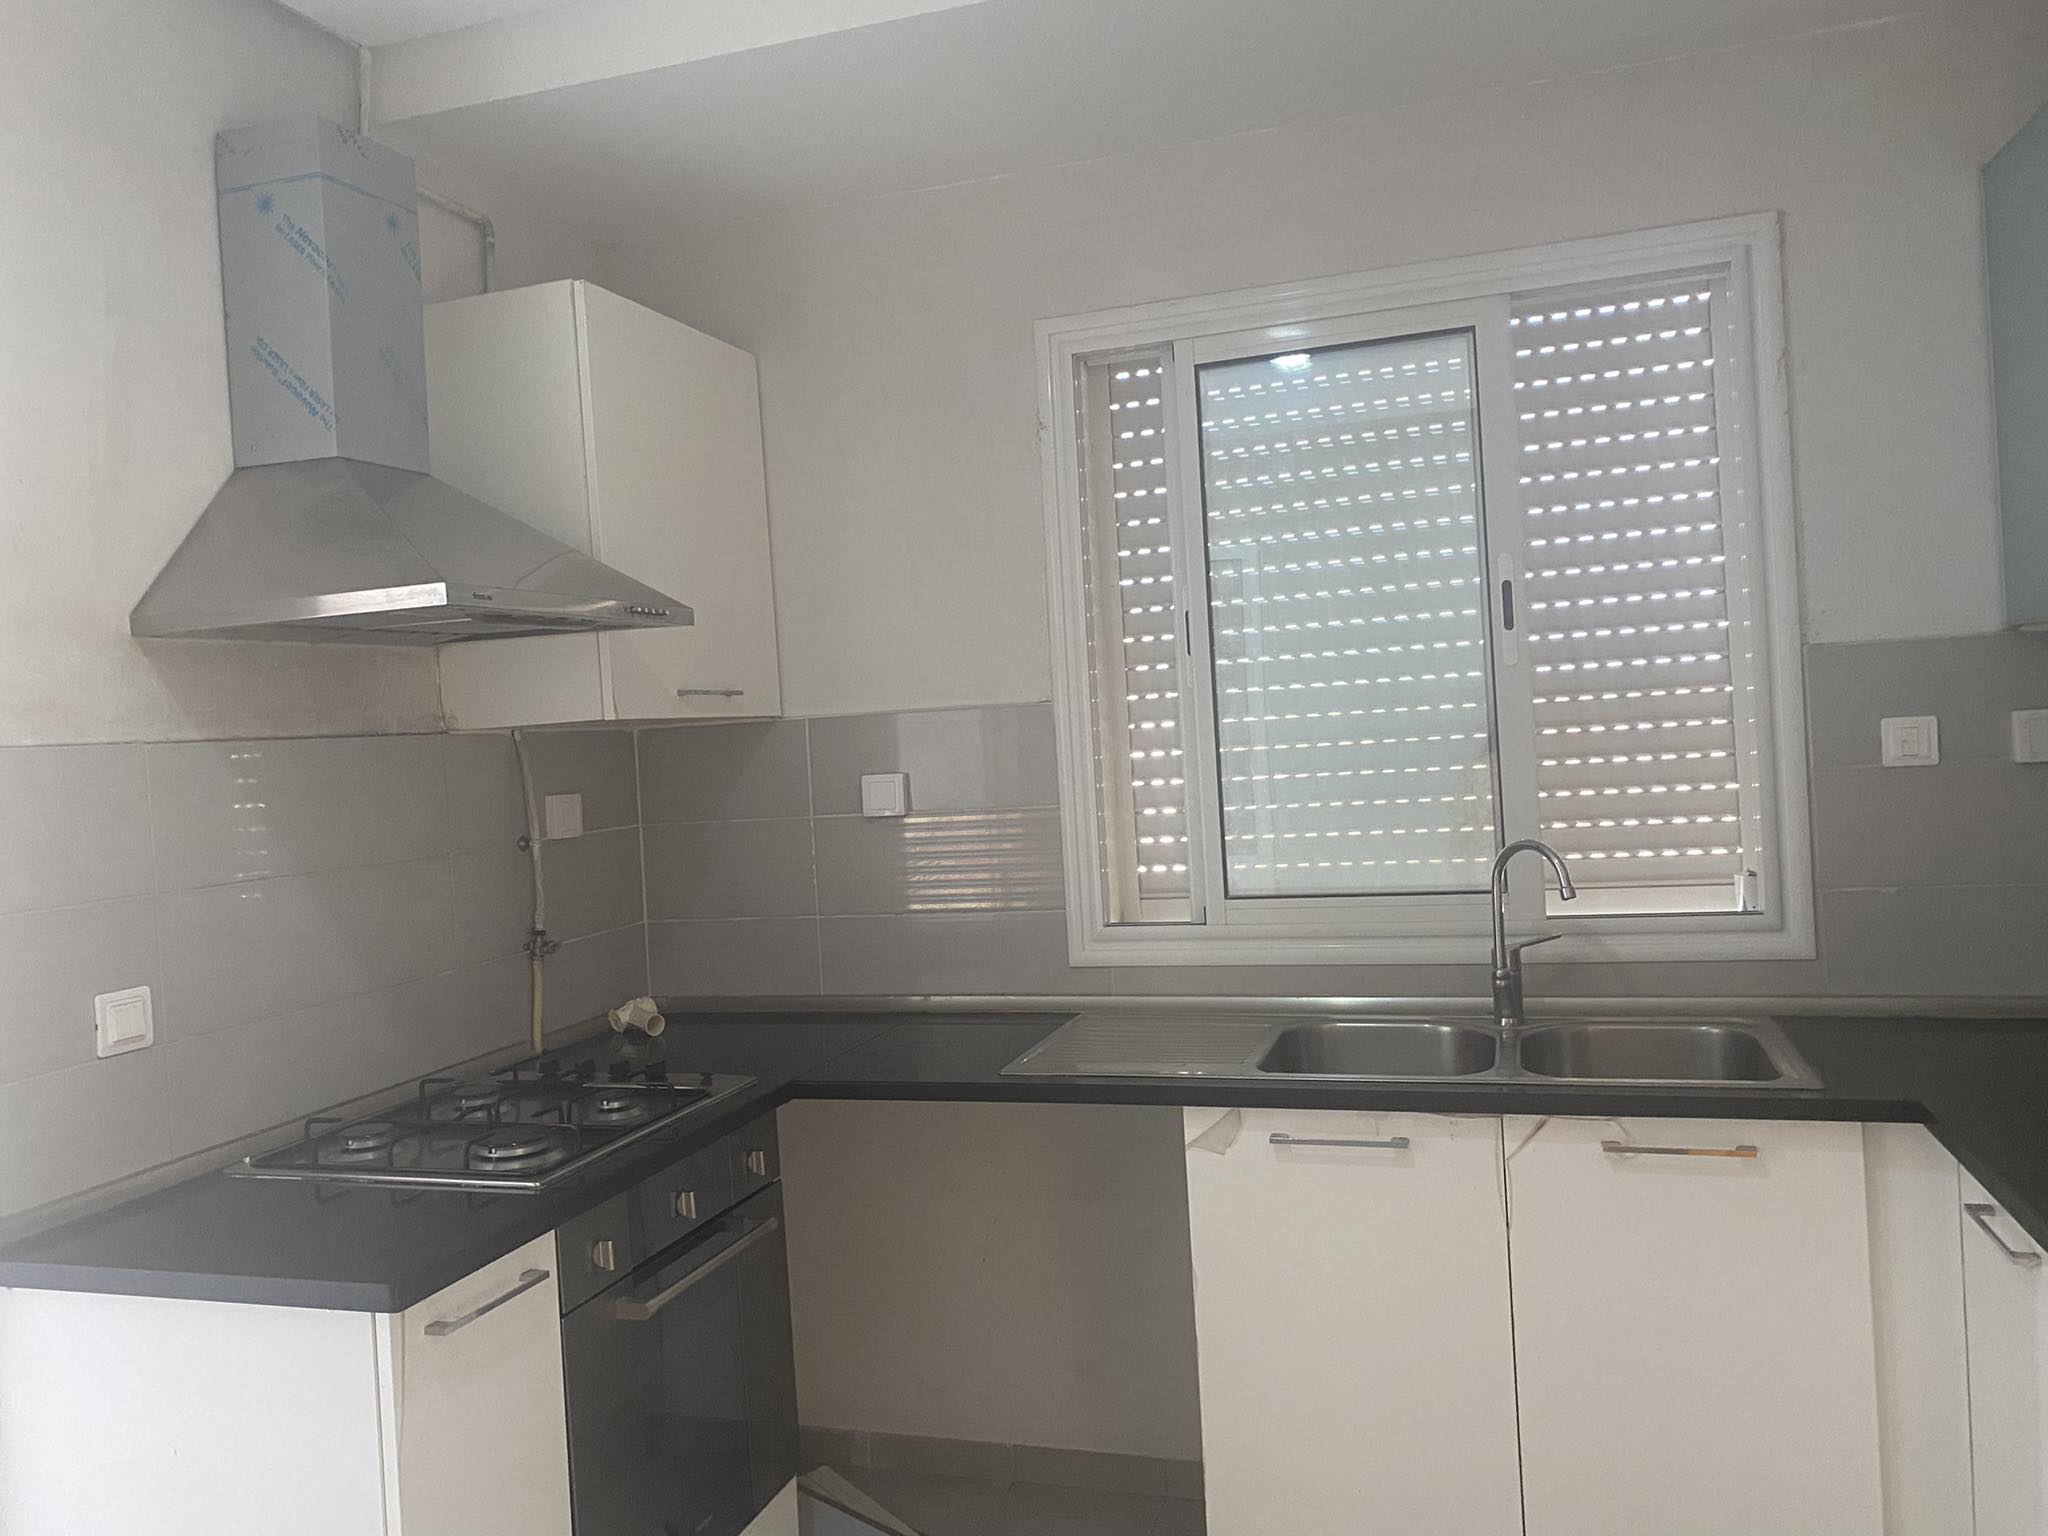 Raoued Cite El Ghazala 1 Location Appart. 3 pices Appartement s2